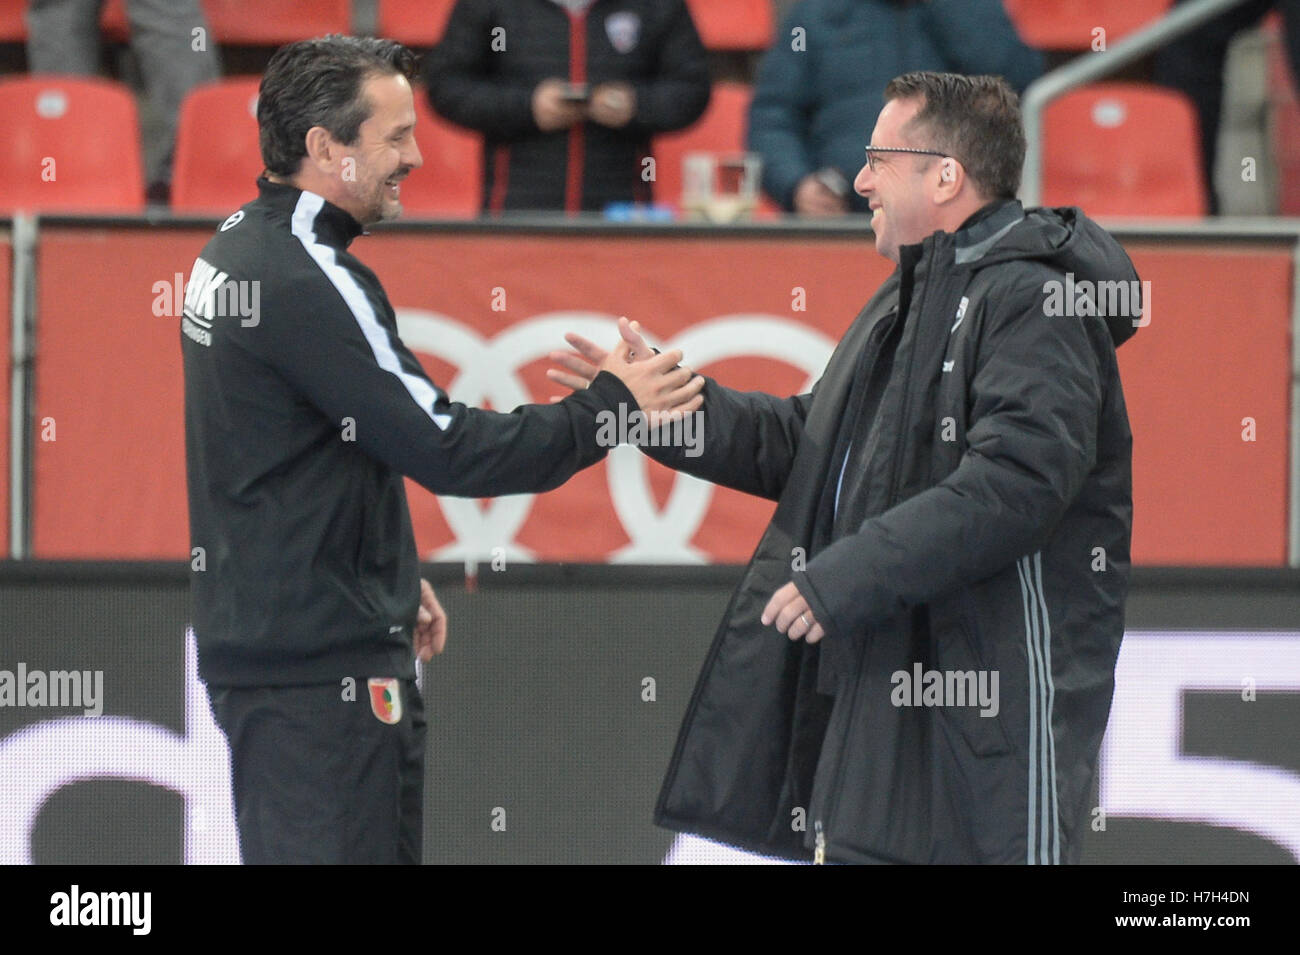 Ingolstadt, Germany. 5th Nov, 2016. Coach Markus Kauczinski (r) of Ingolstadt and coach Dirk Schuster of Augsburg greet each other before the soccer match between FC Ingolstadt o4 and FC Augsburg on the tenth match day of the Bundesliga at Audi Sportpark in Ingolstadt, Germany, 5 November 2016. PHOTO: ARMIN WEIGEL/dpa (ATTENTION: Due to the accreditation guidelines, the DFL only permits the publication and utilisation of up to 15 pictures per match on the internet and in online media during the match.) Credit:  dpa/Alamy Live News Stock Photo